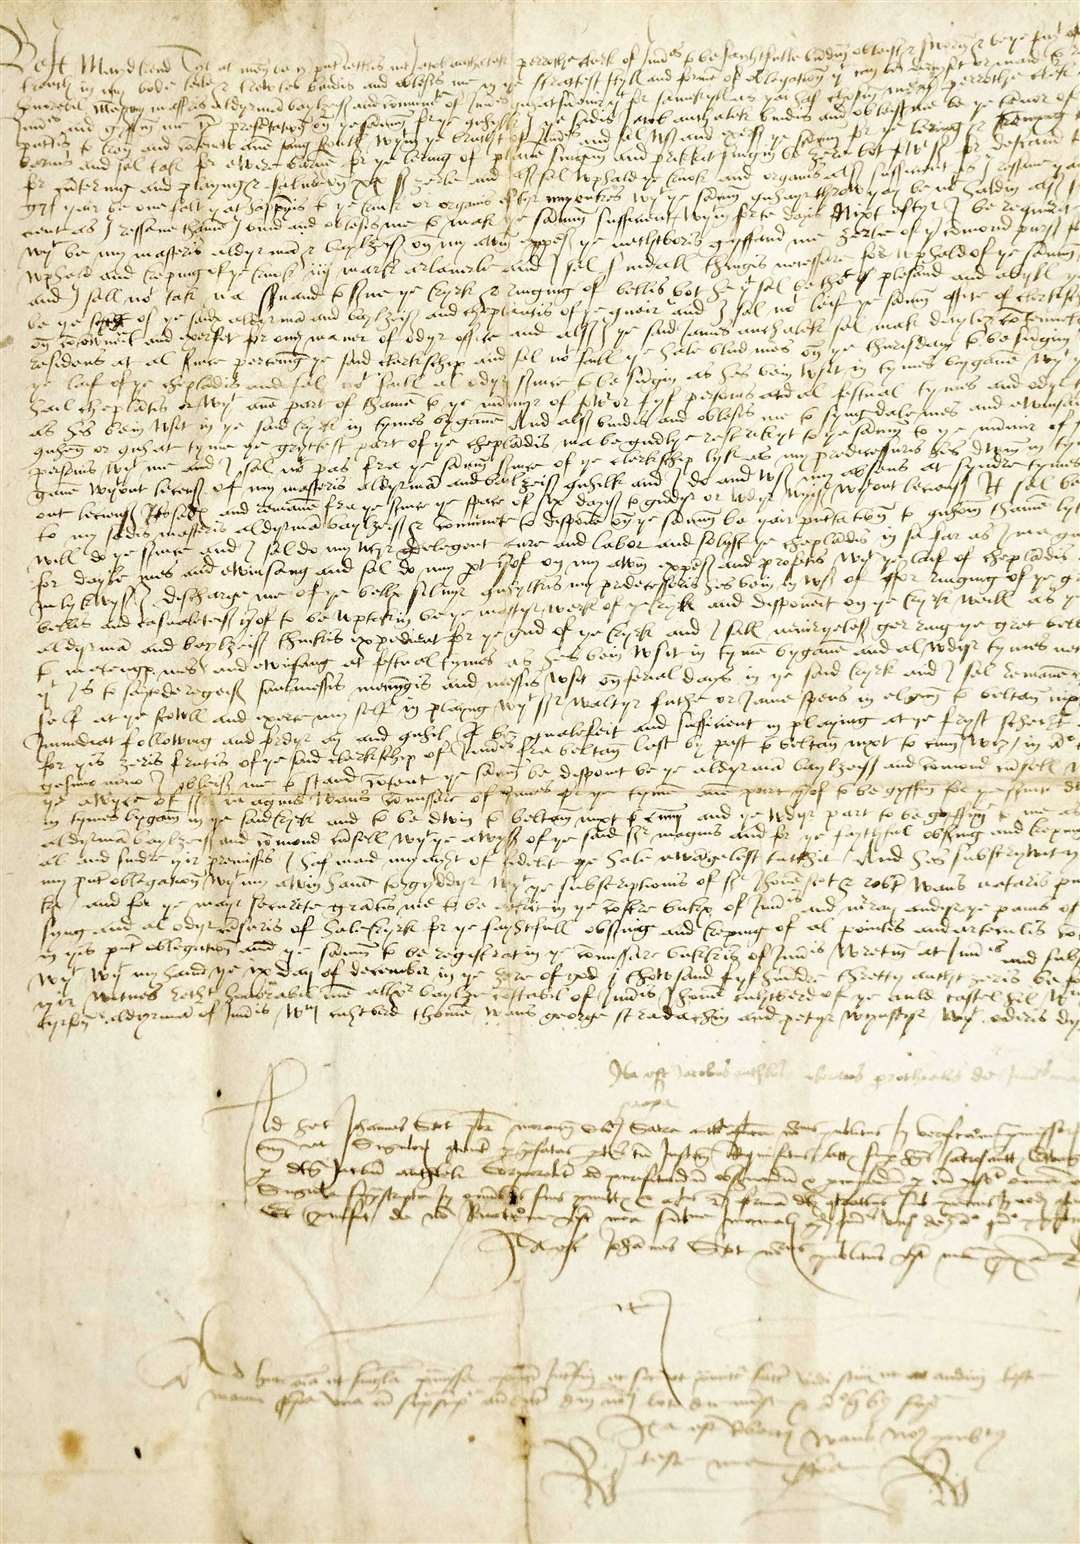 An extract from the Burgh of Inverness Town Clerk, Obligation by Sir Jacob Aucheleck, 1538.